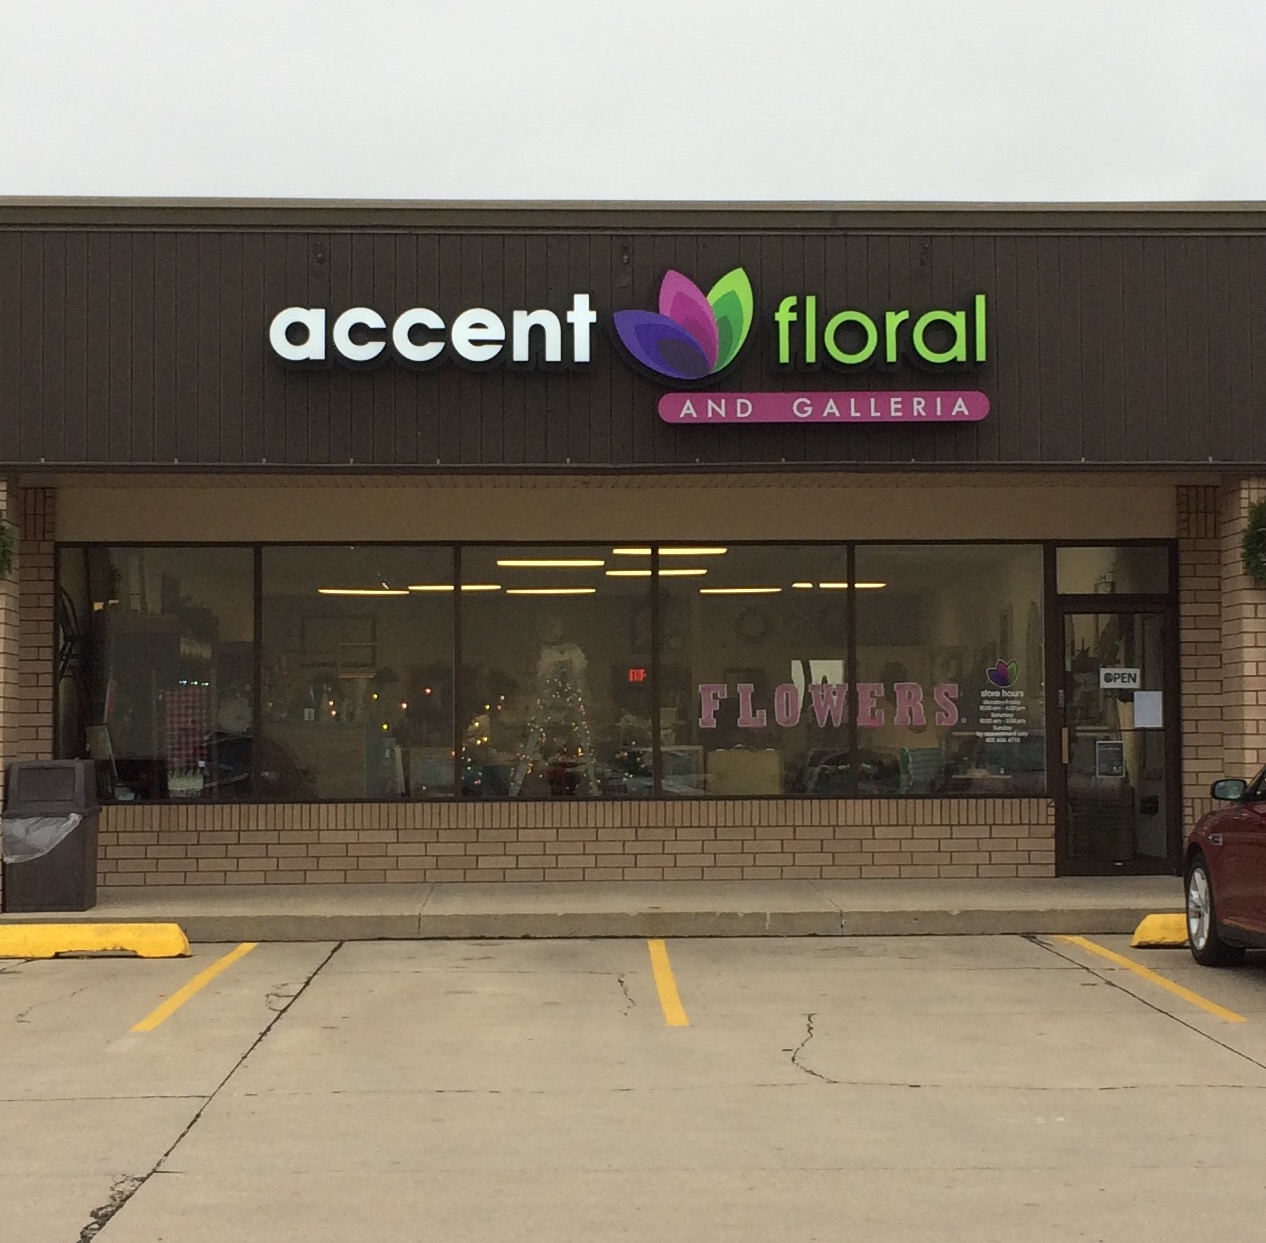 Accent Floral and Galleria